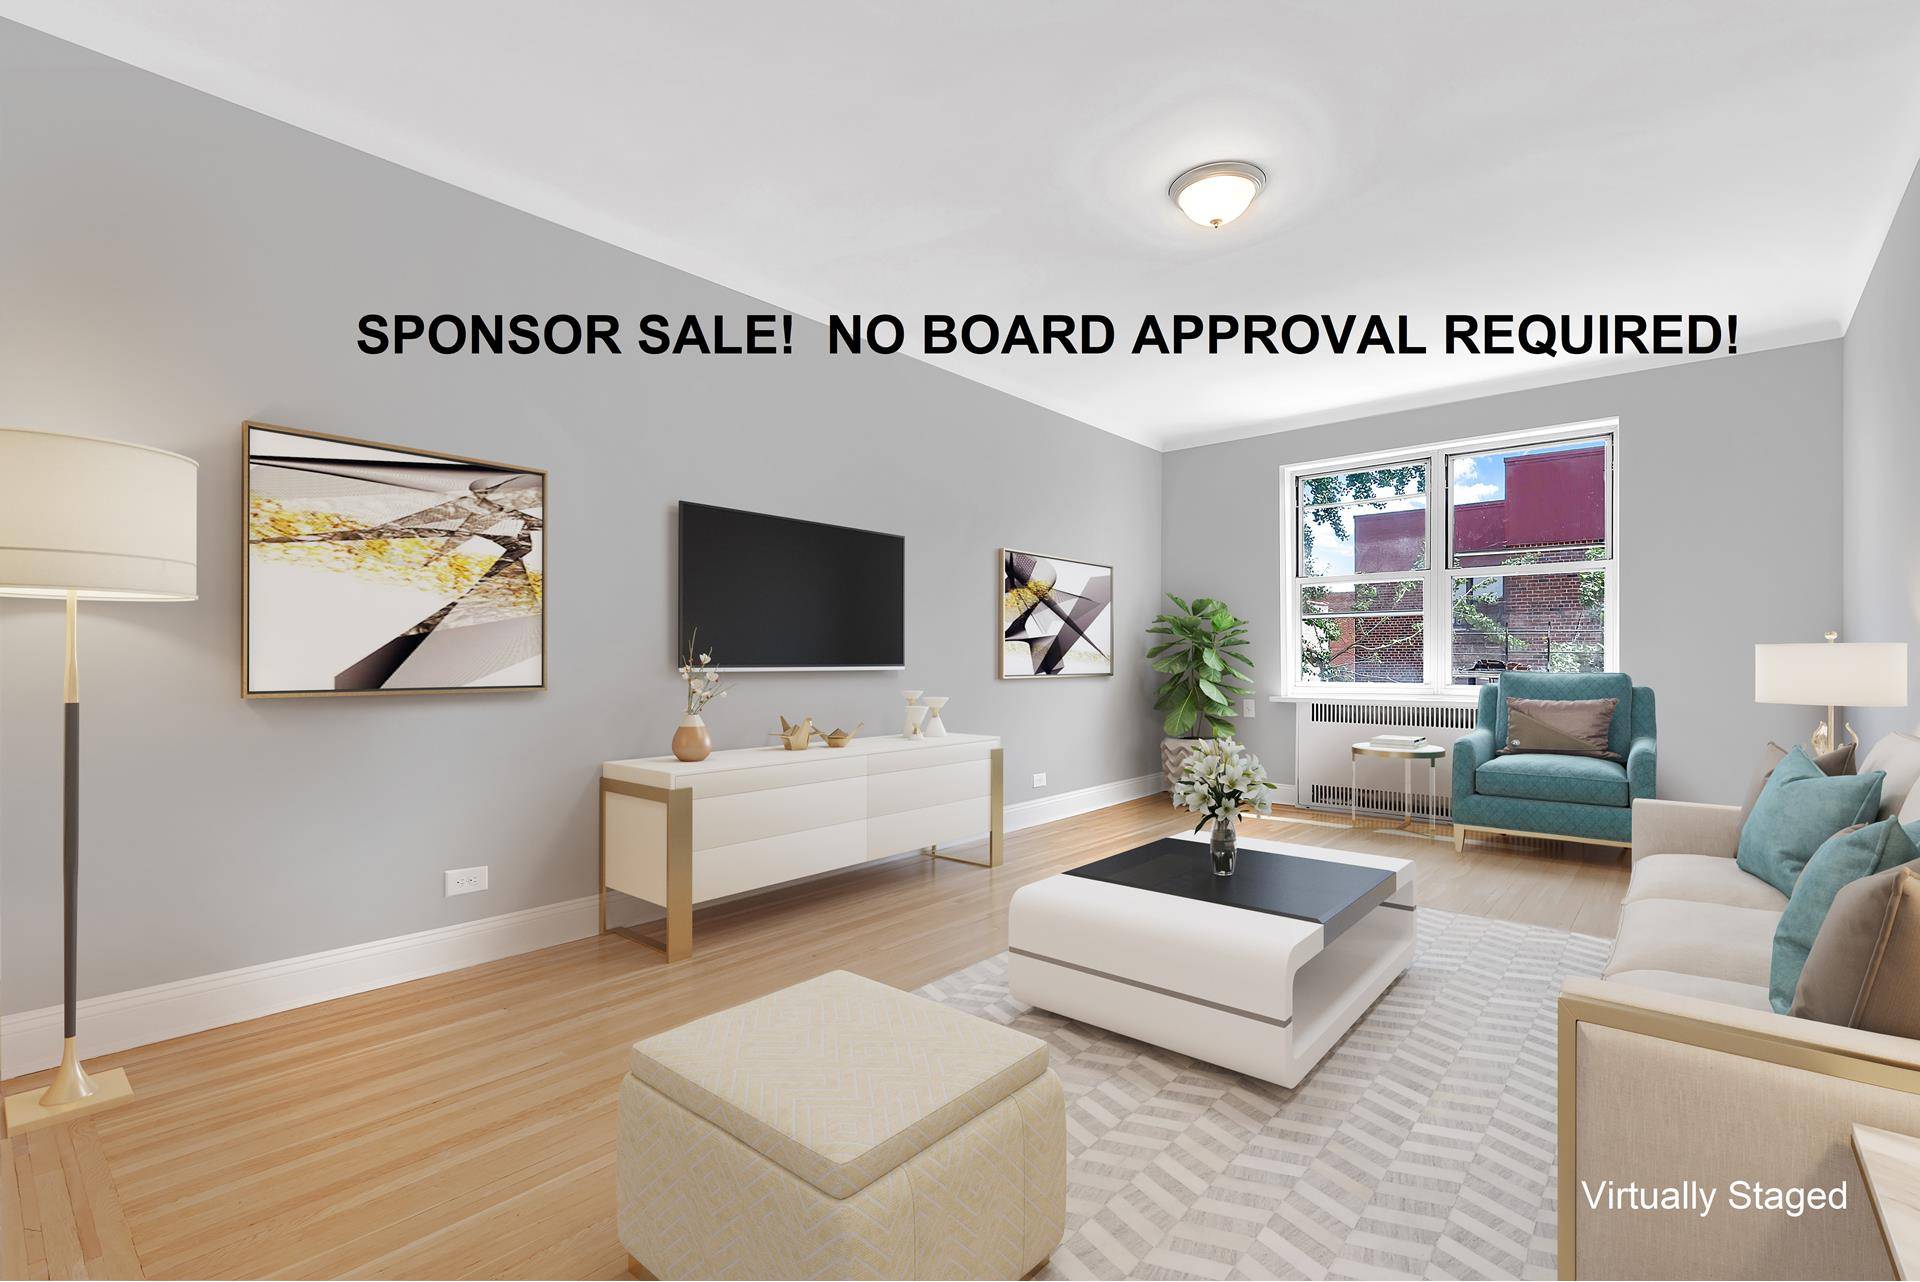 SPONSOR SALE, NO BOARD APPROVAL REQUIRED ON THIS GORGEOUS NEWLY RENOVATED TOP FLOOR 2 BEDROOM !